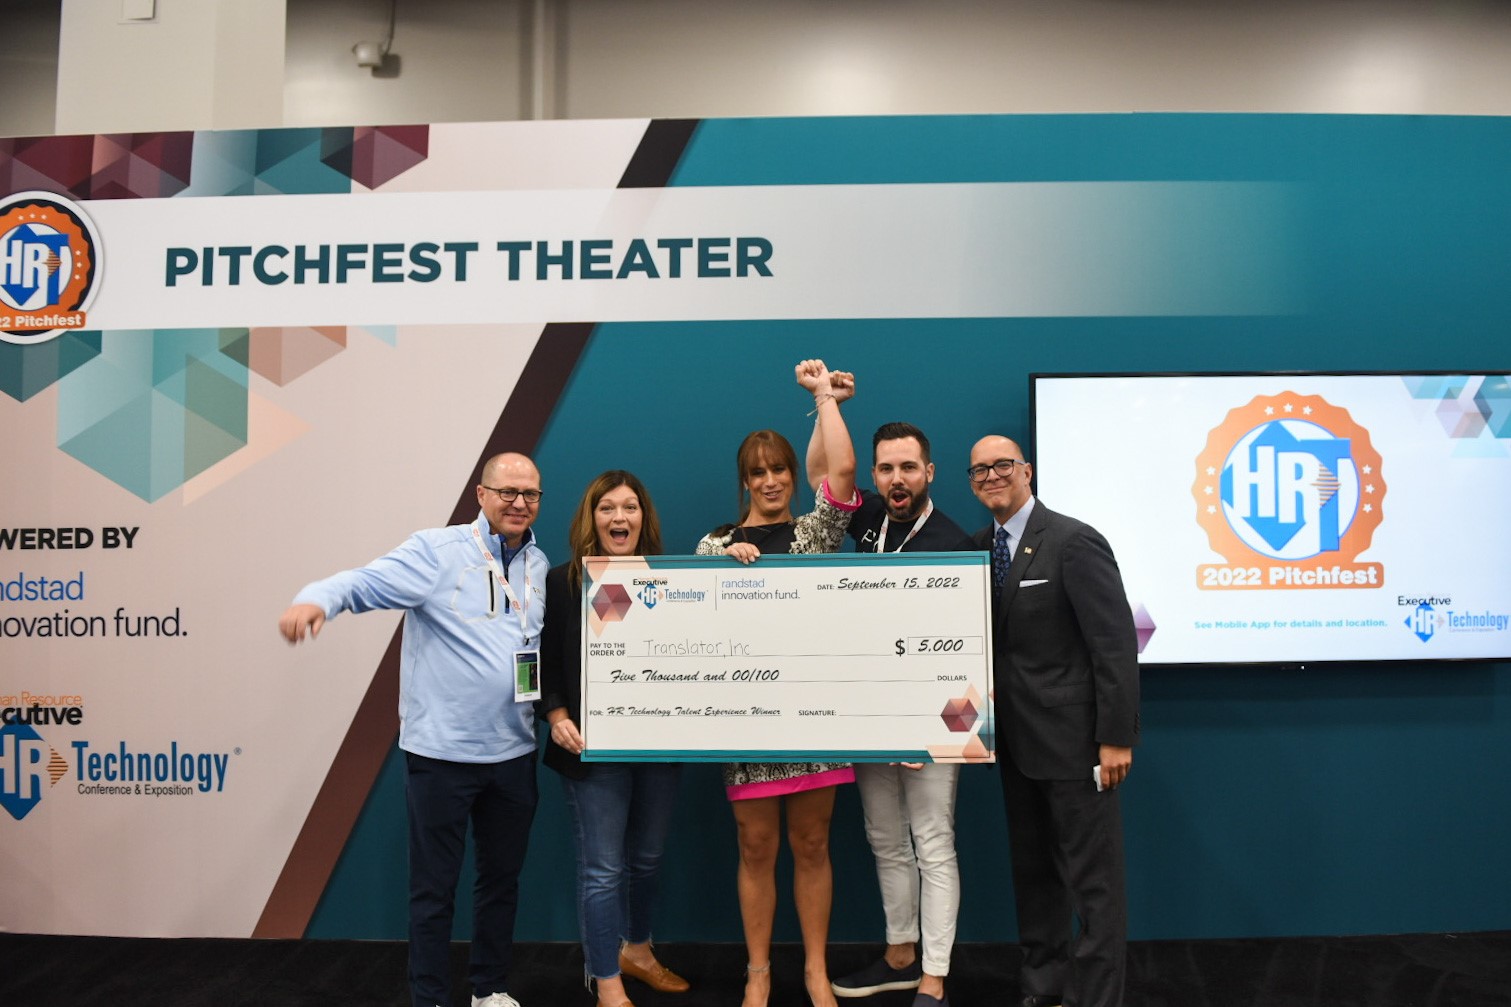 Natalie Egan, CEO and founder of Translator, a DEI analytics solution provider, also received a $5,000 Innovation and Talent Experience Technology, also sponsored by Randstad.